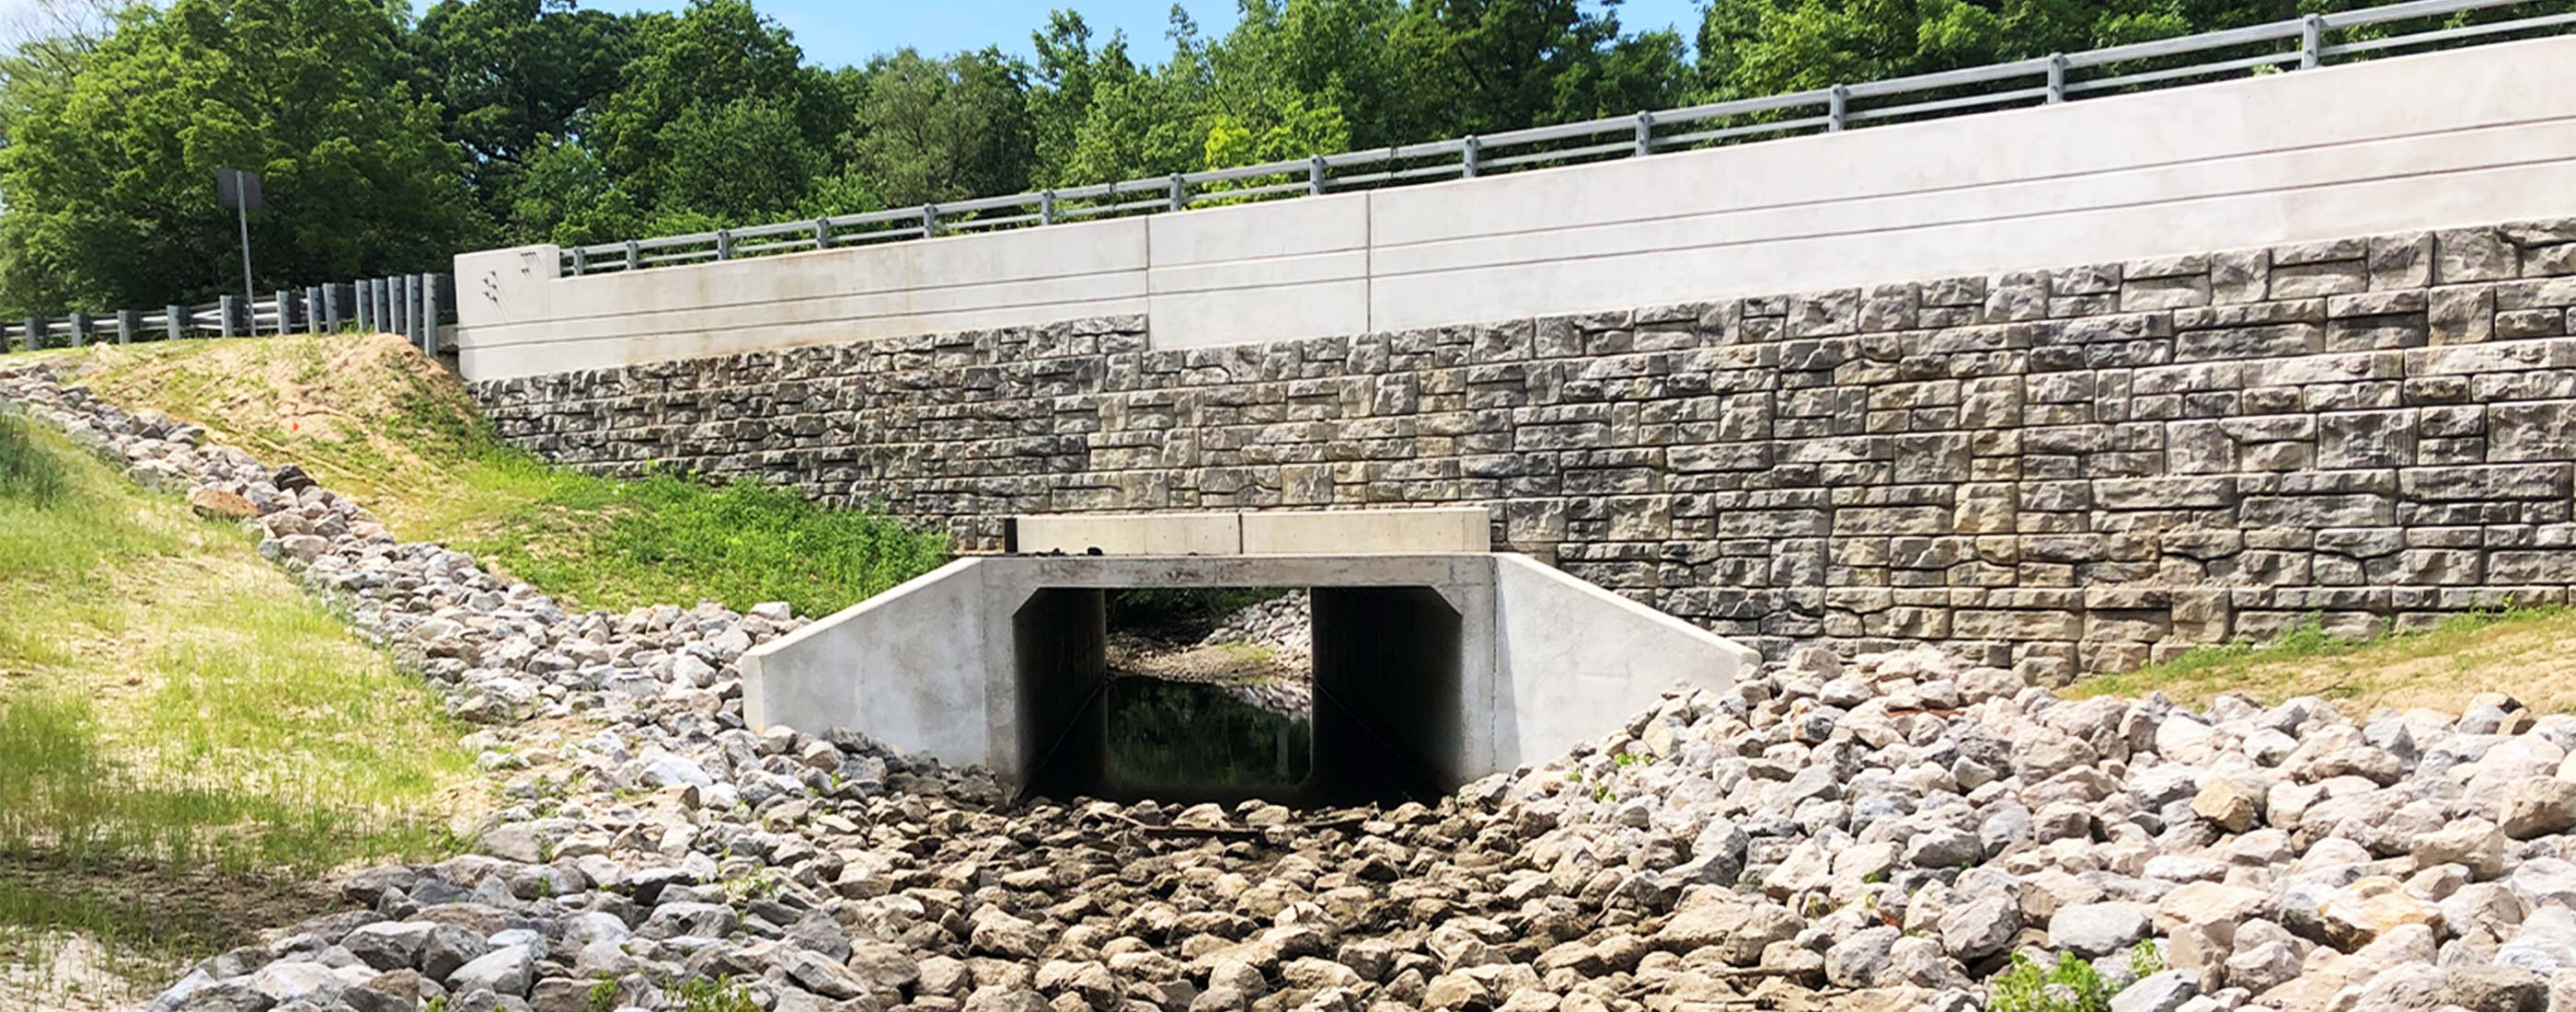 Ground view of the culvert